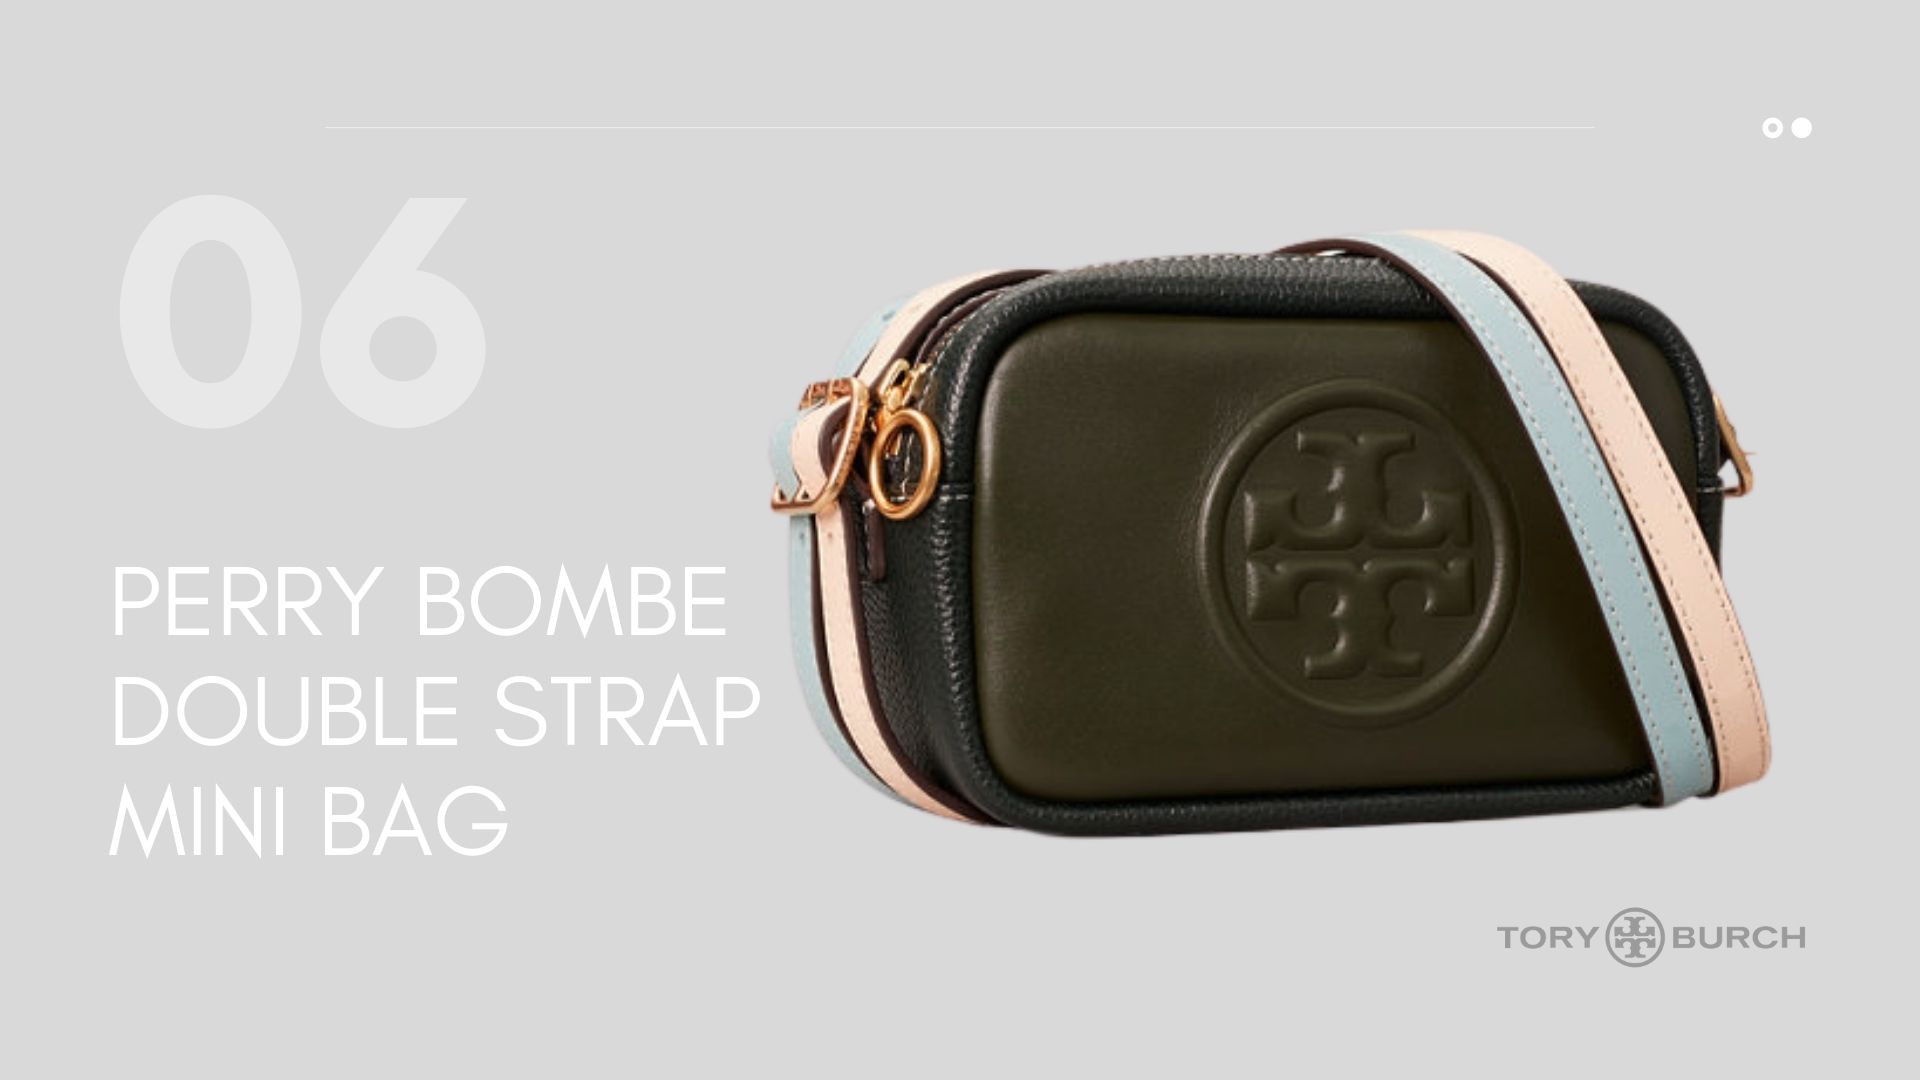 Perry Bombe Double Strap Mini -tory burch ราคา-tory burch thailand-tory burch bag-tory burch กระเป๋า